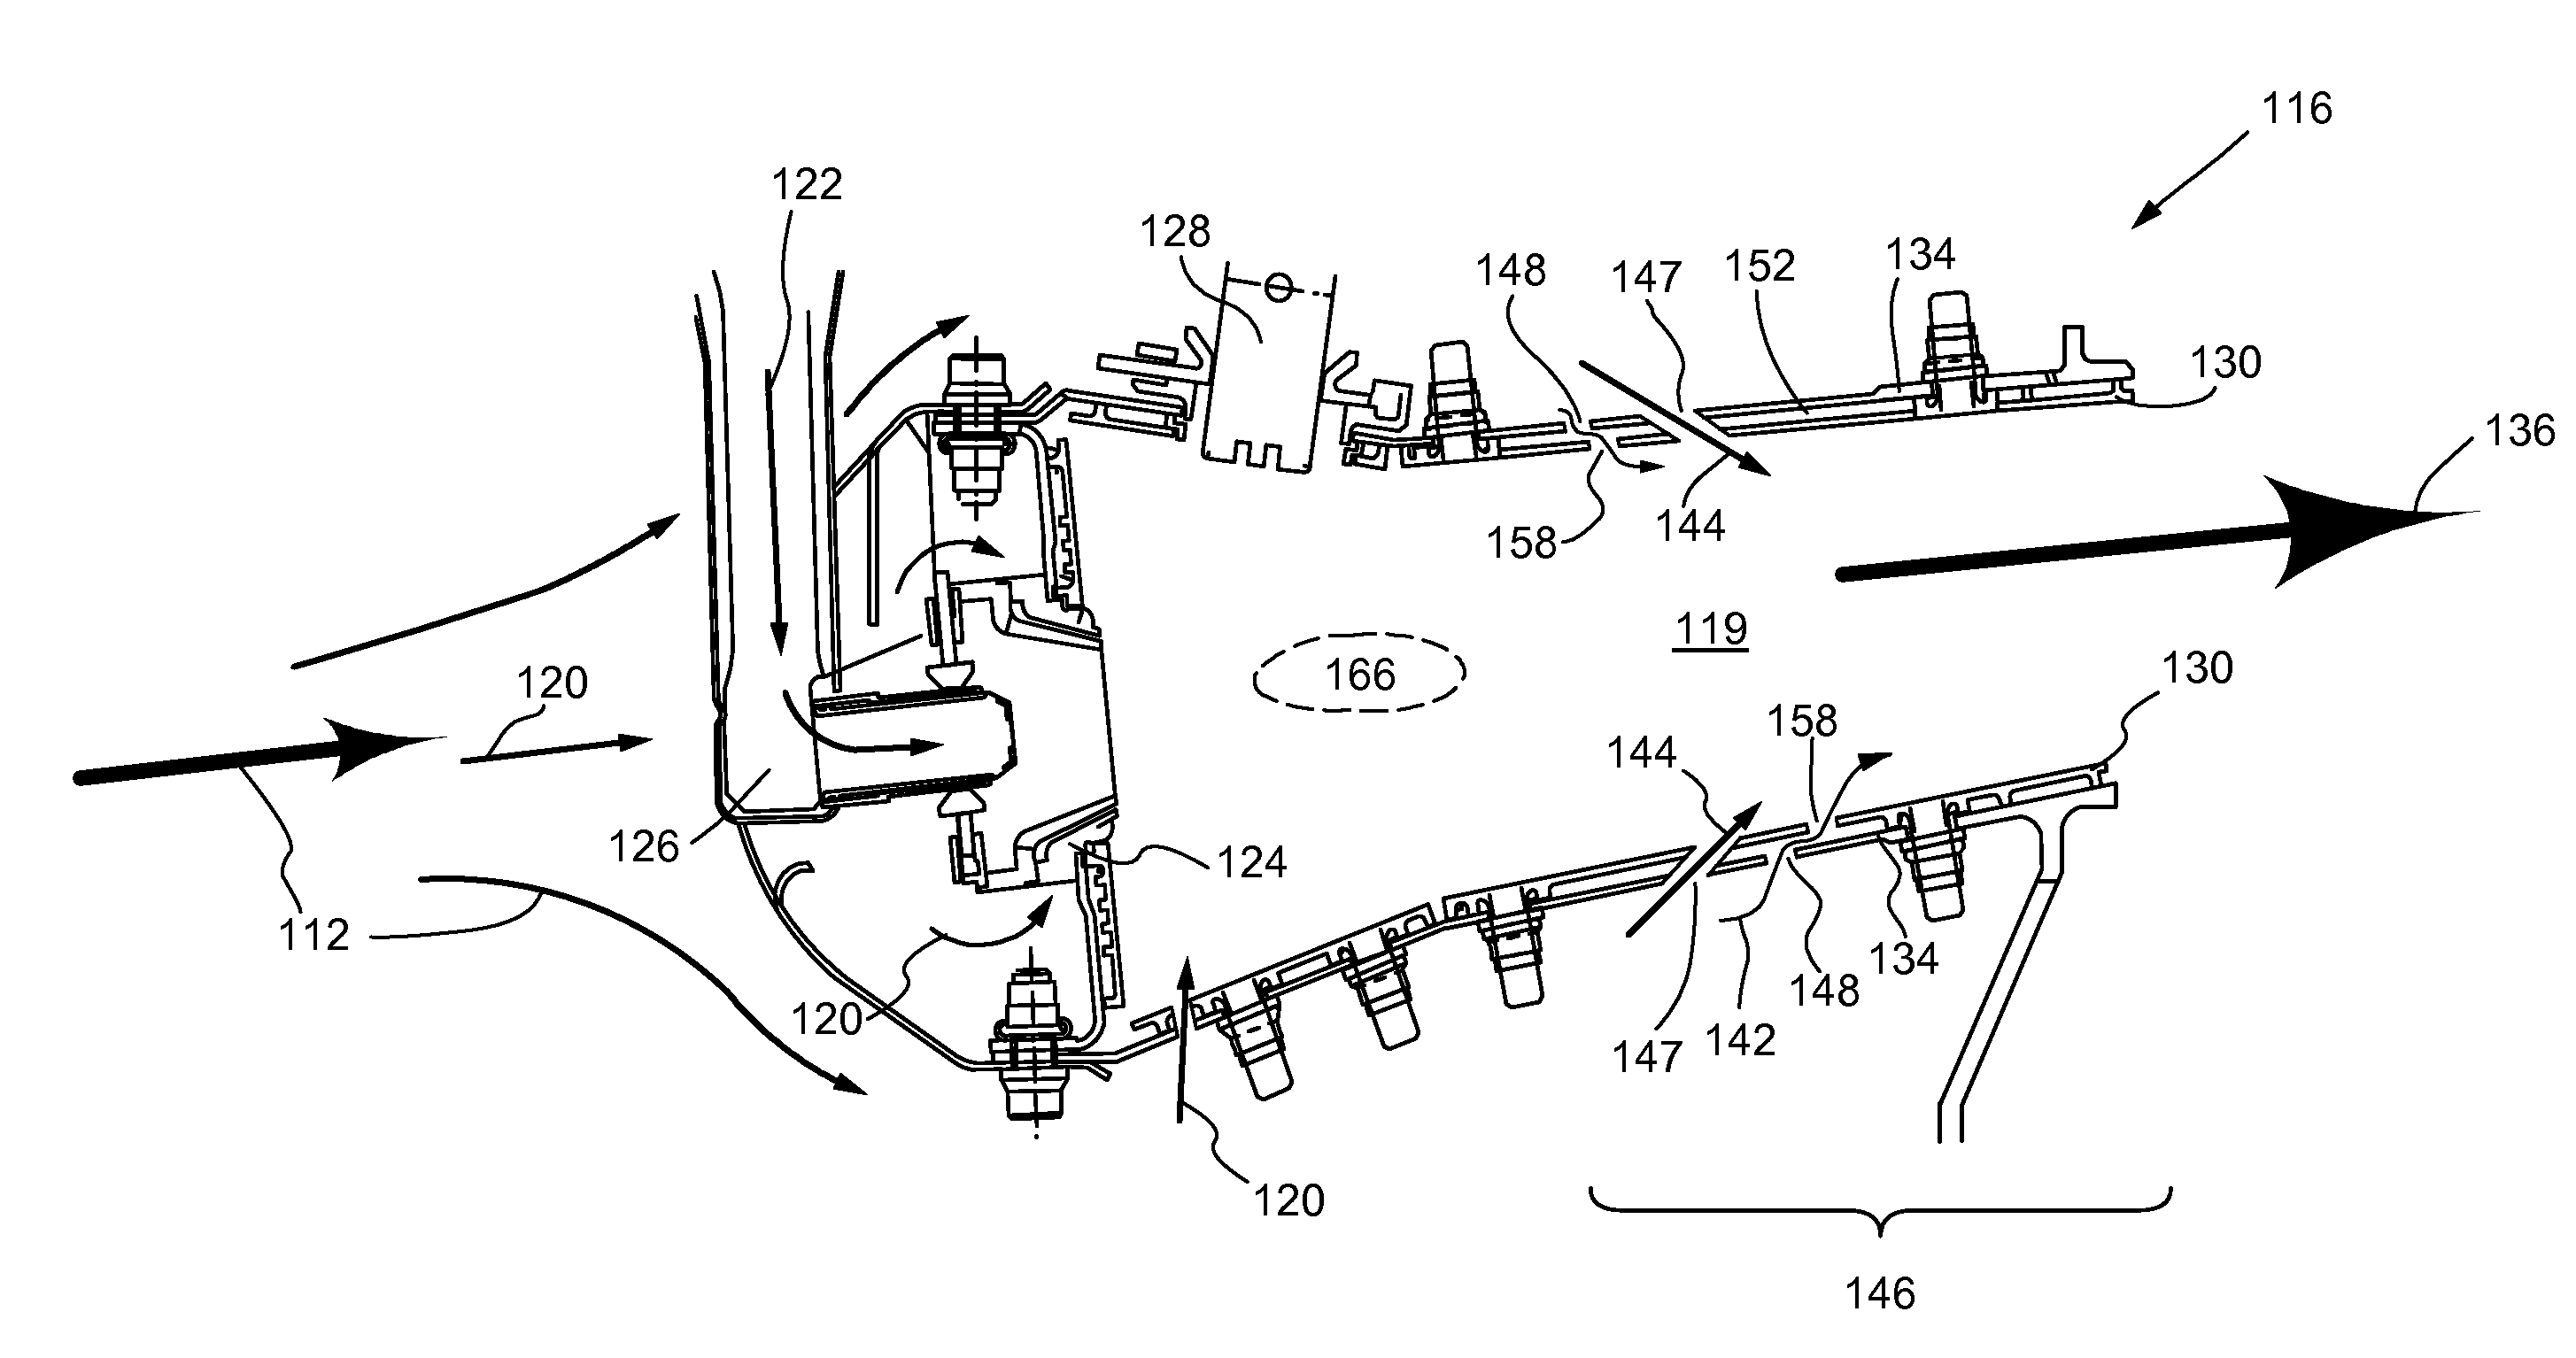 Cooling for Combustor Liners with Accelerating Channels